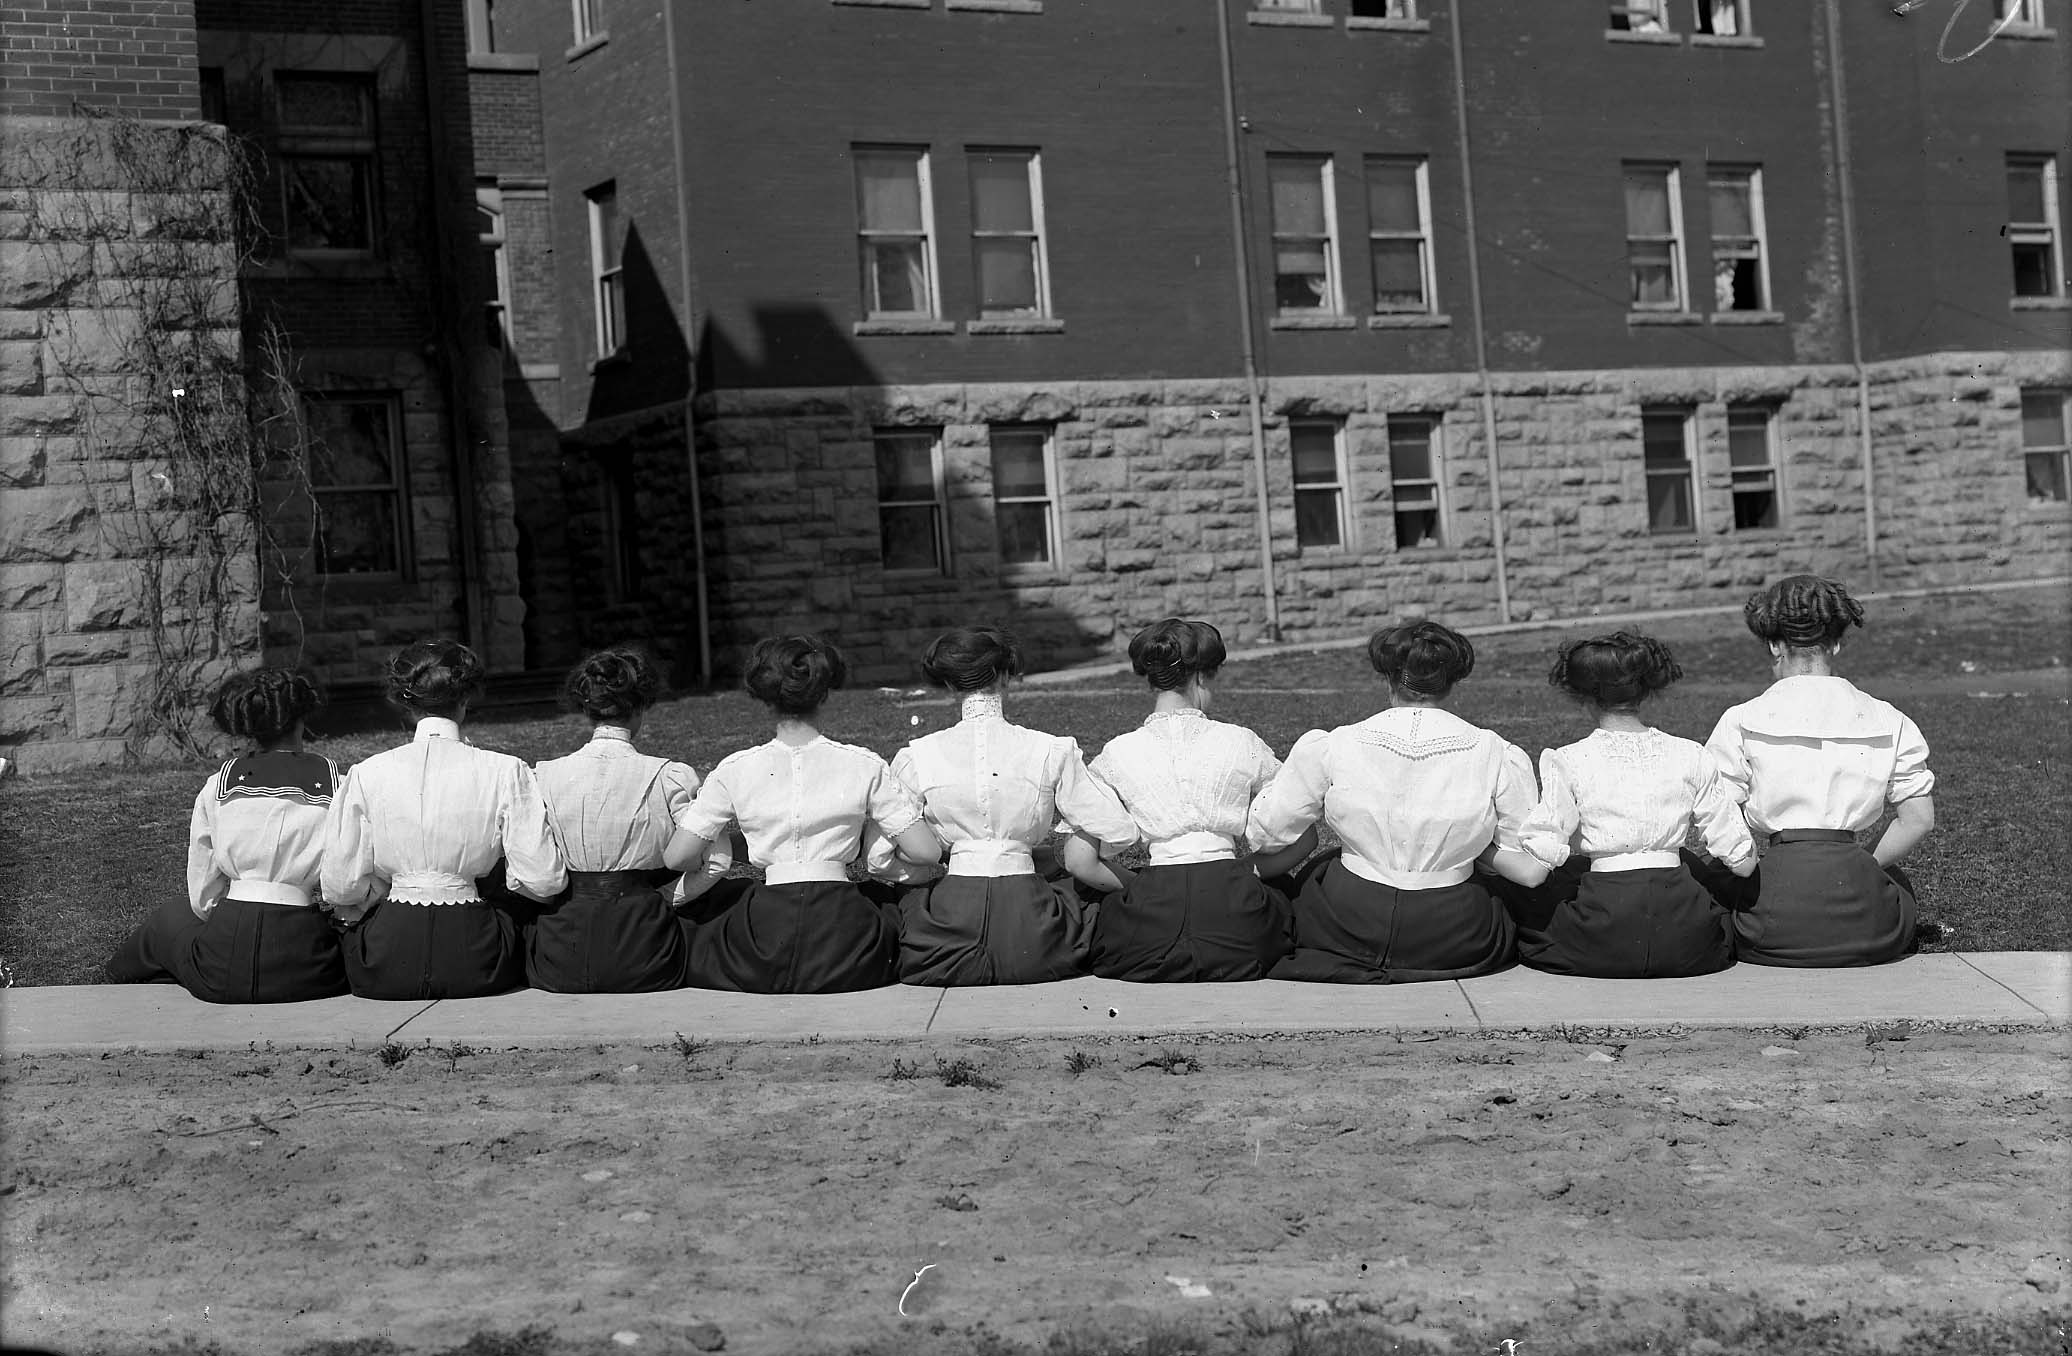 C:11/13/1, Box 1, Env 8 Back View of a Line of Seated Female Students, ca. 1910-1915